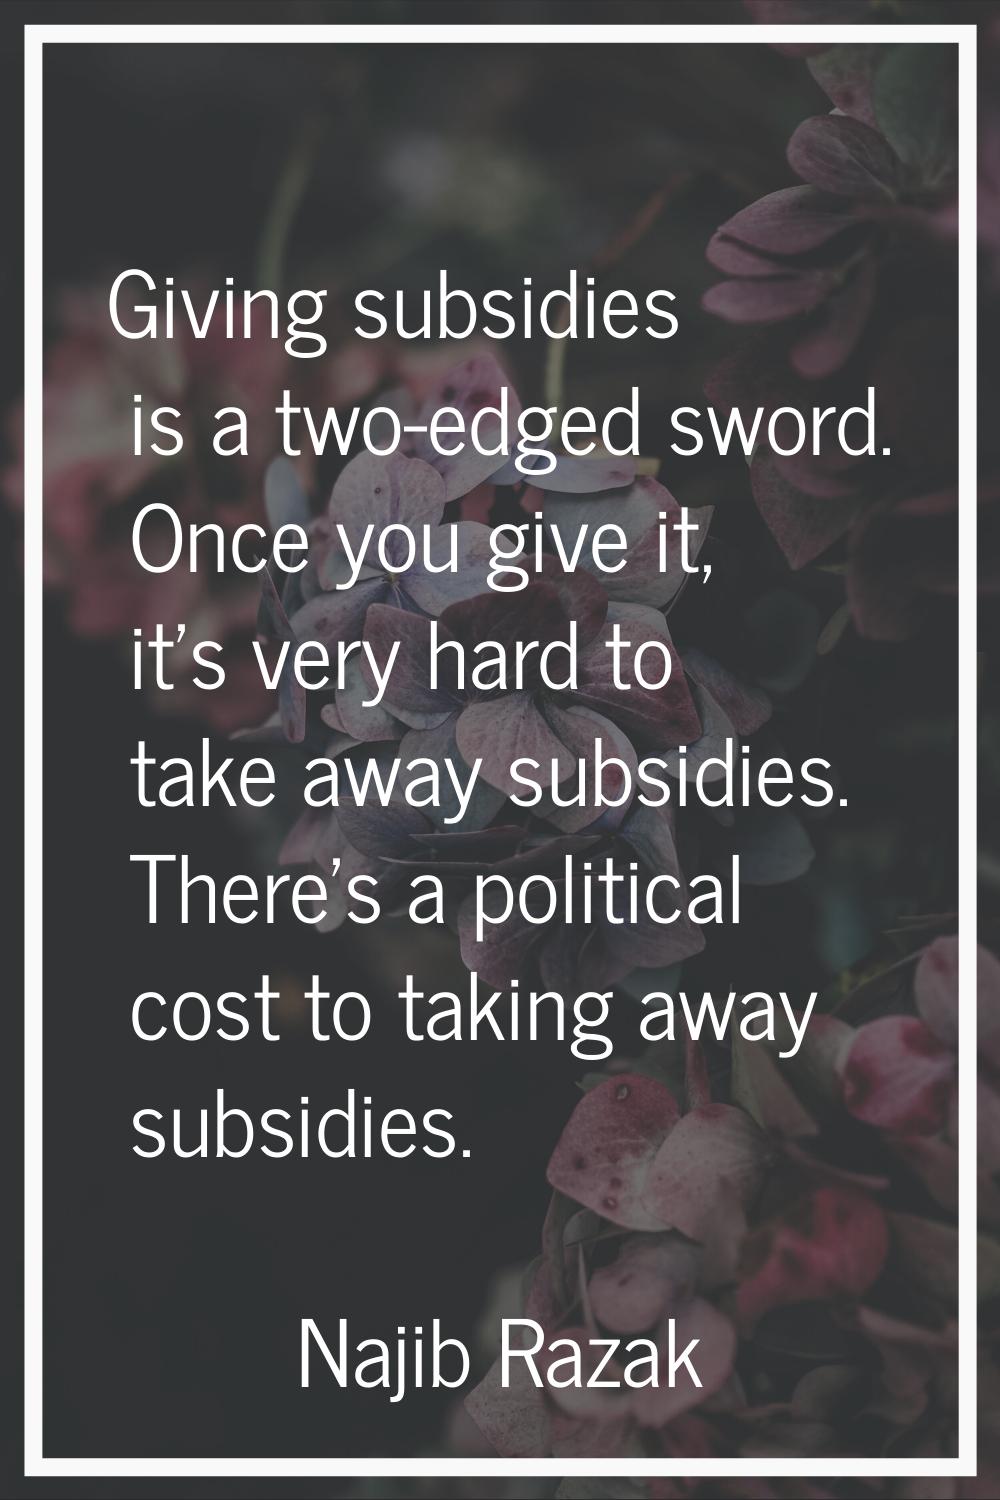 Giving subsidies is a two-edged sword. Once you give it, it's very hard to take away subsidies. The